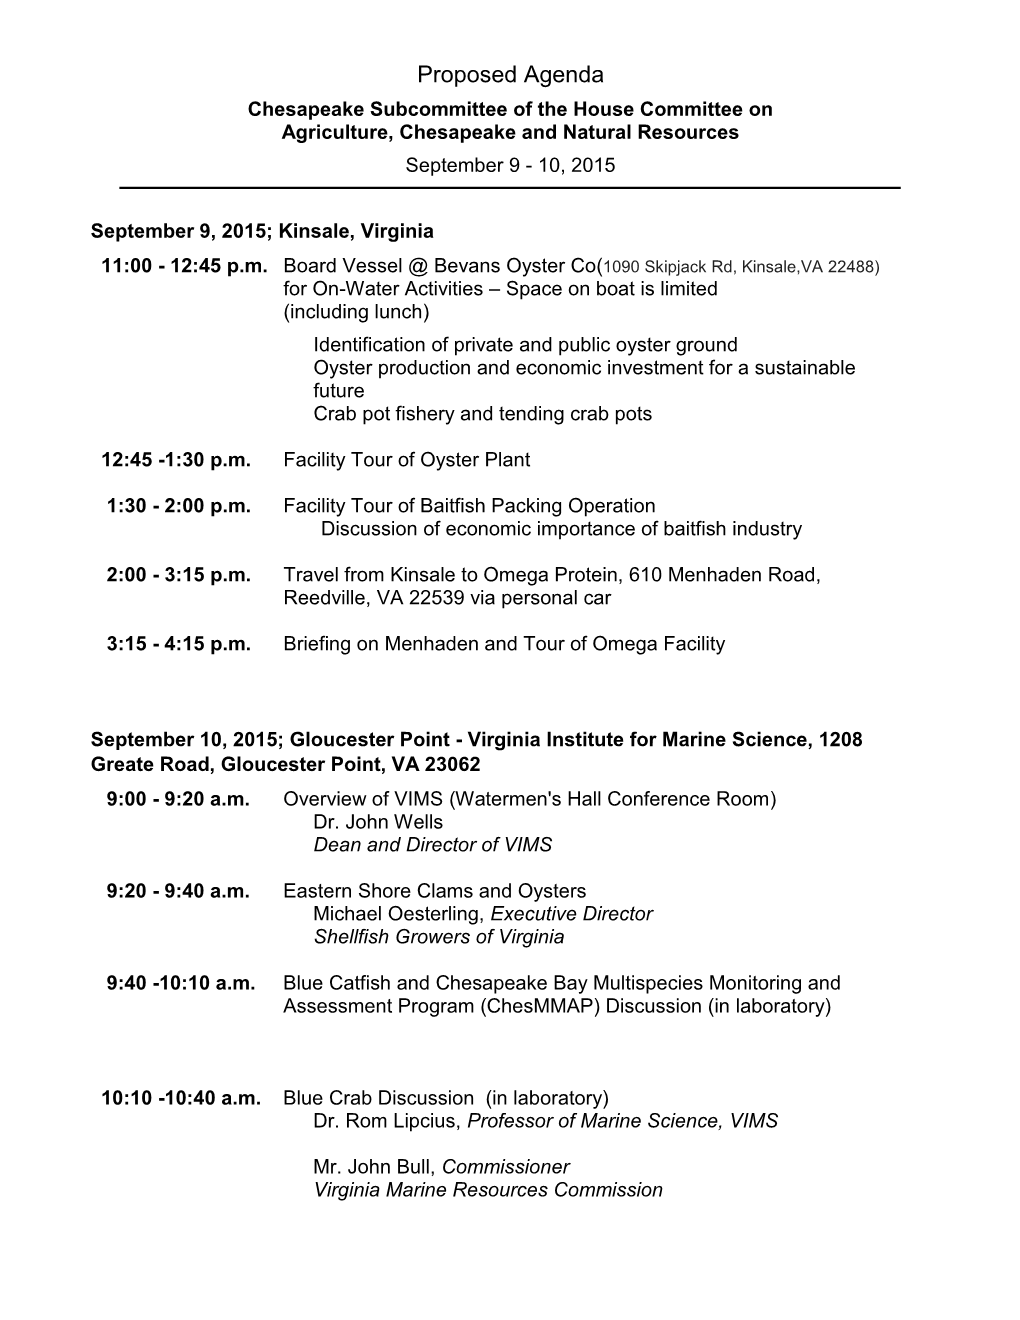 Proposed Agenda Chesapeake Subcommittee of the House Committee on Agriculture, Chesapeake and Natural Resources September 9 - 10, 2015